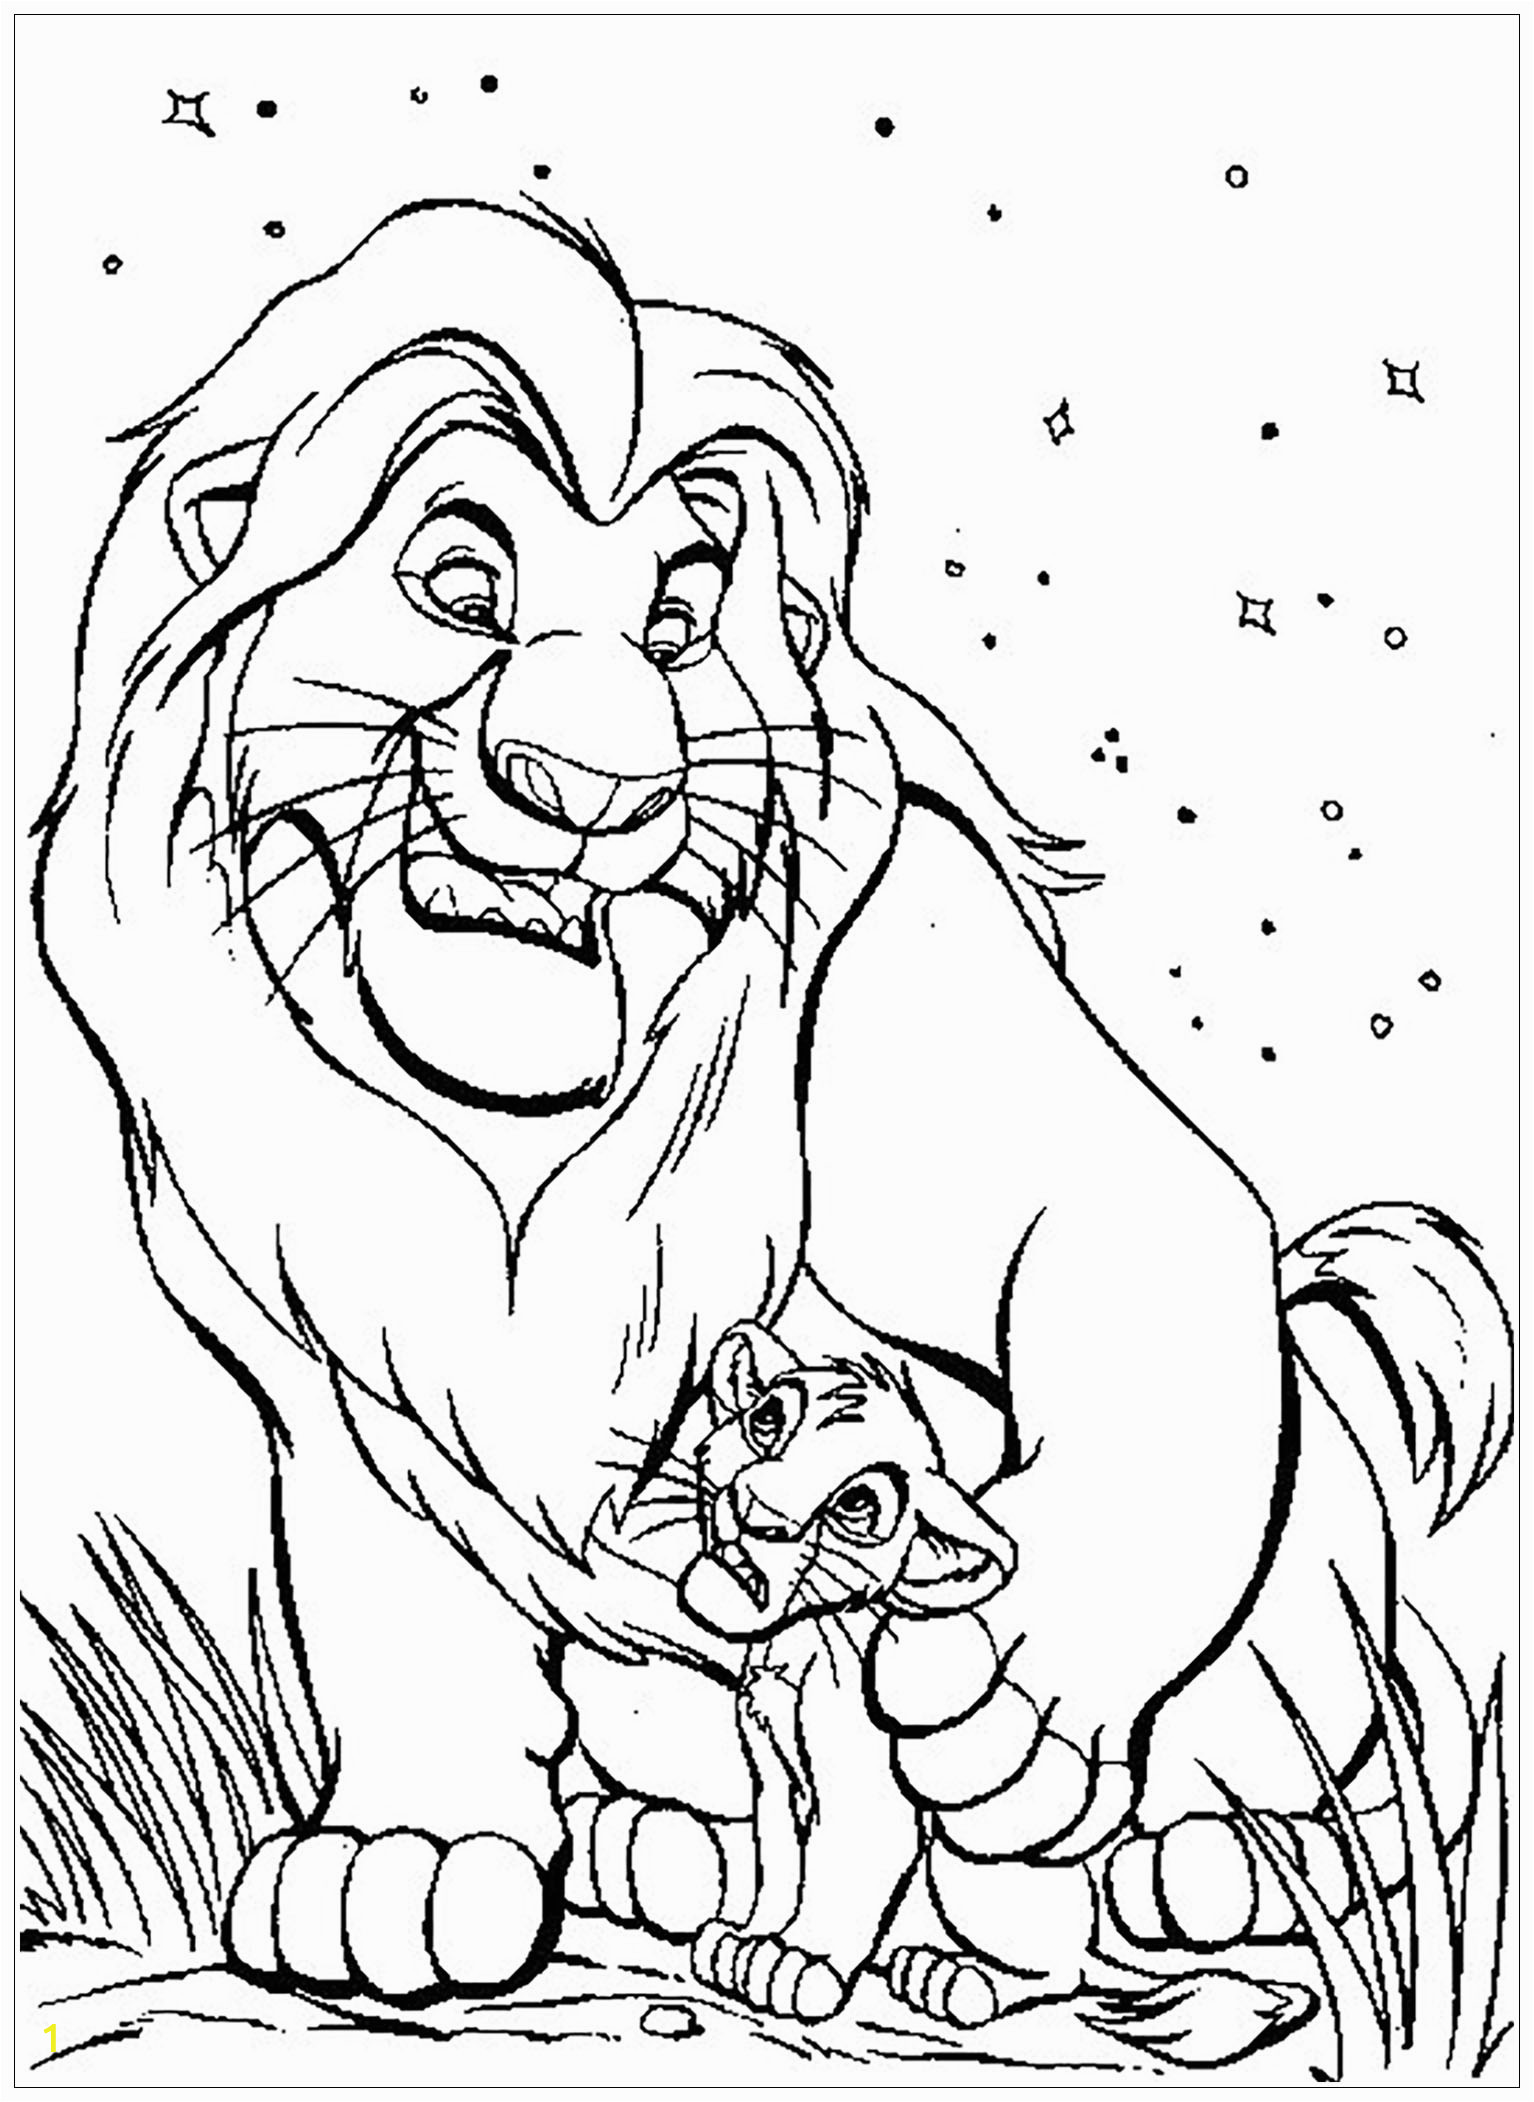 Lion King Free Printable Coloring Pages Free Printable Pages Lion King Coloring Pages